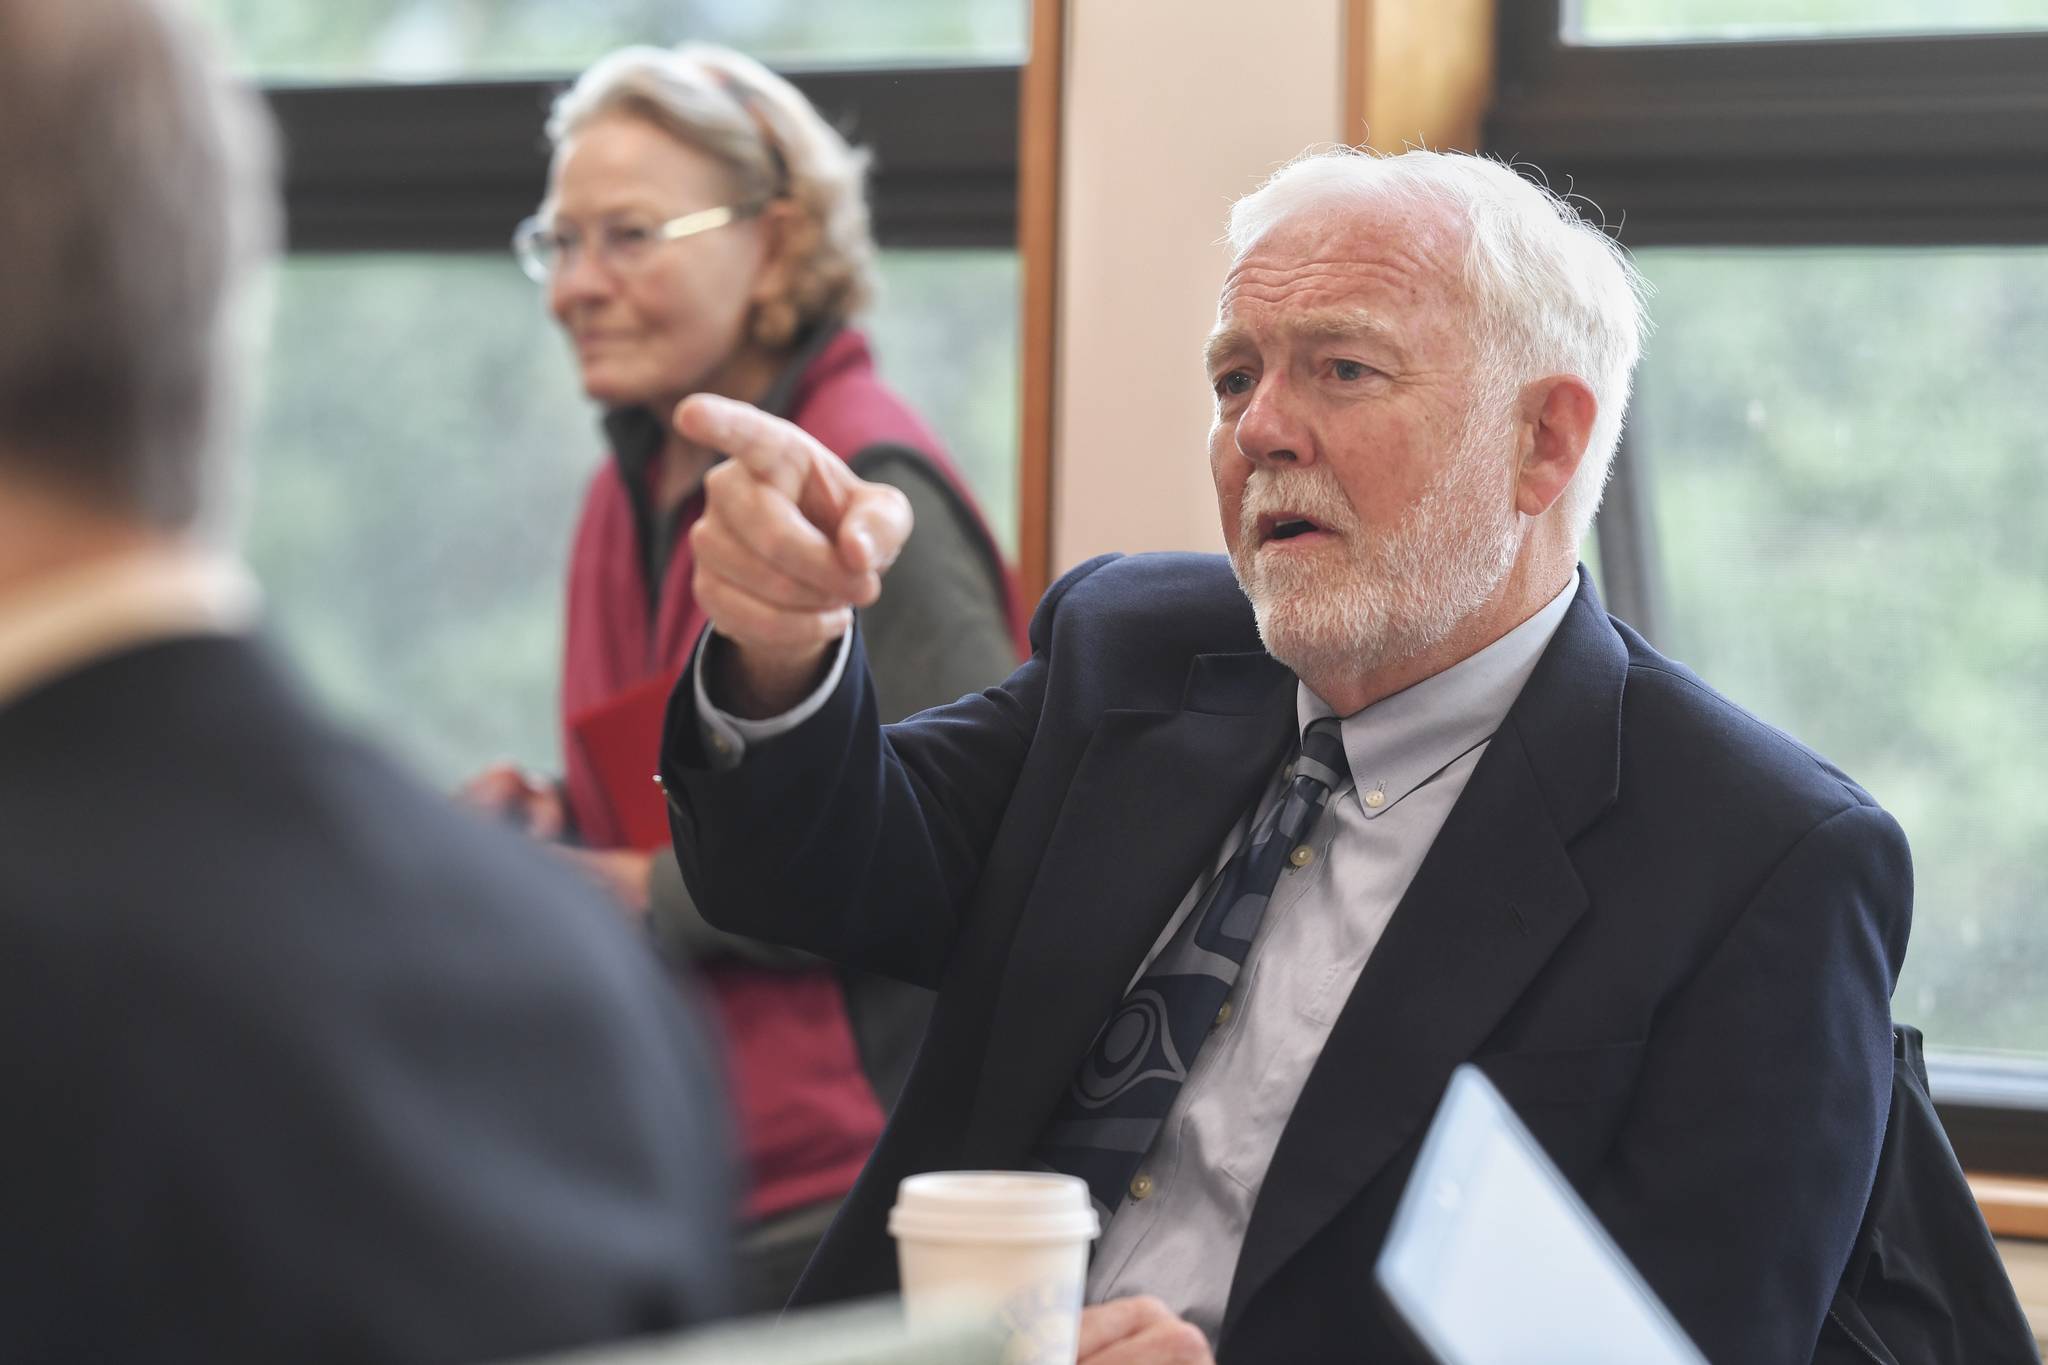 Dr. Richard Caulfield, Chancellor at the University of Alaska Southeast, watches an online meeting being held at UA campuses around the state on Gov. Mike Dunleavy’s budget cuts on Monday, July 15, 2019. (Michael Penn | Juneau Empire File)